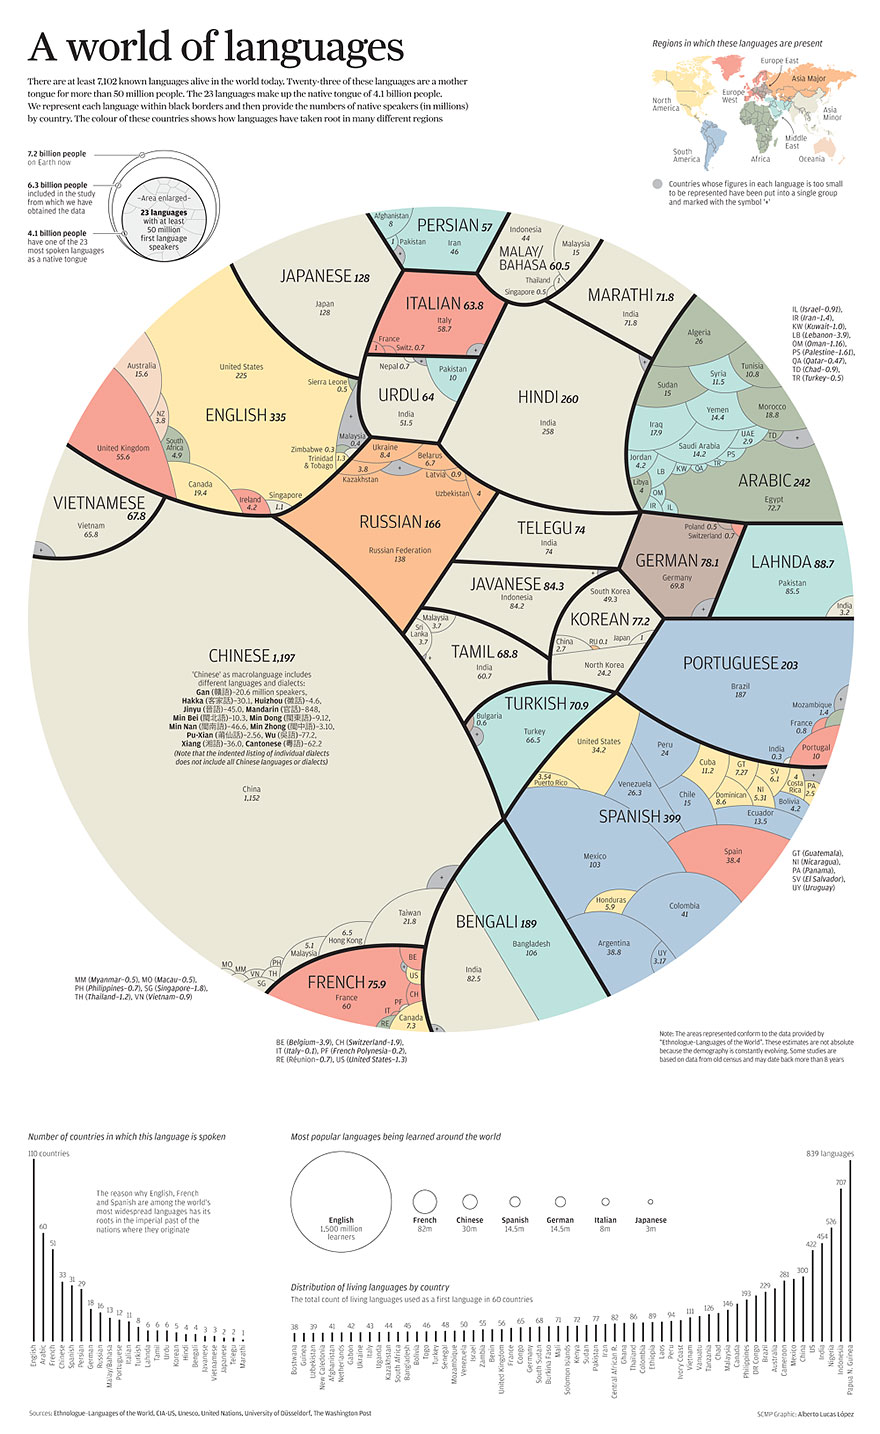 languages-of-the-world-1.jpg